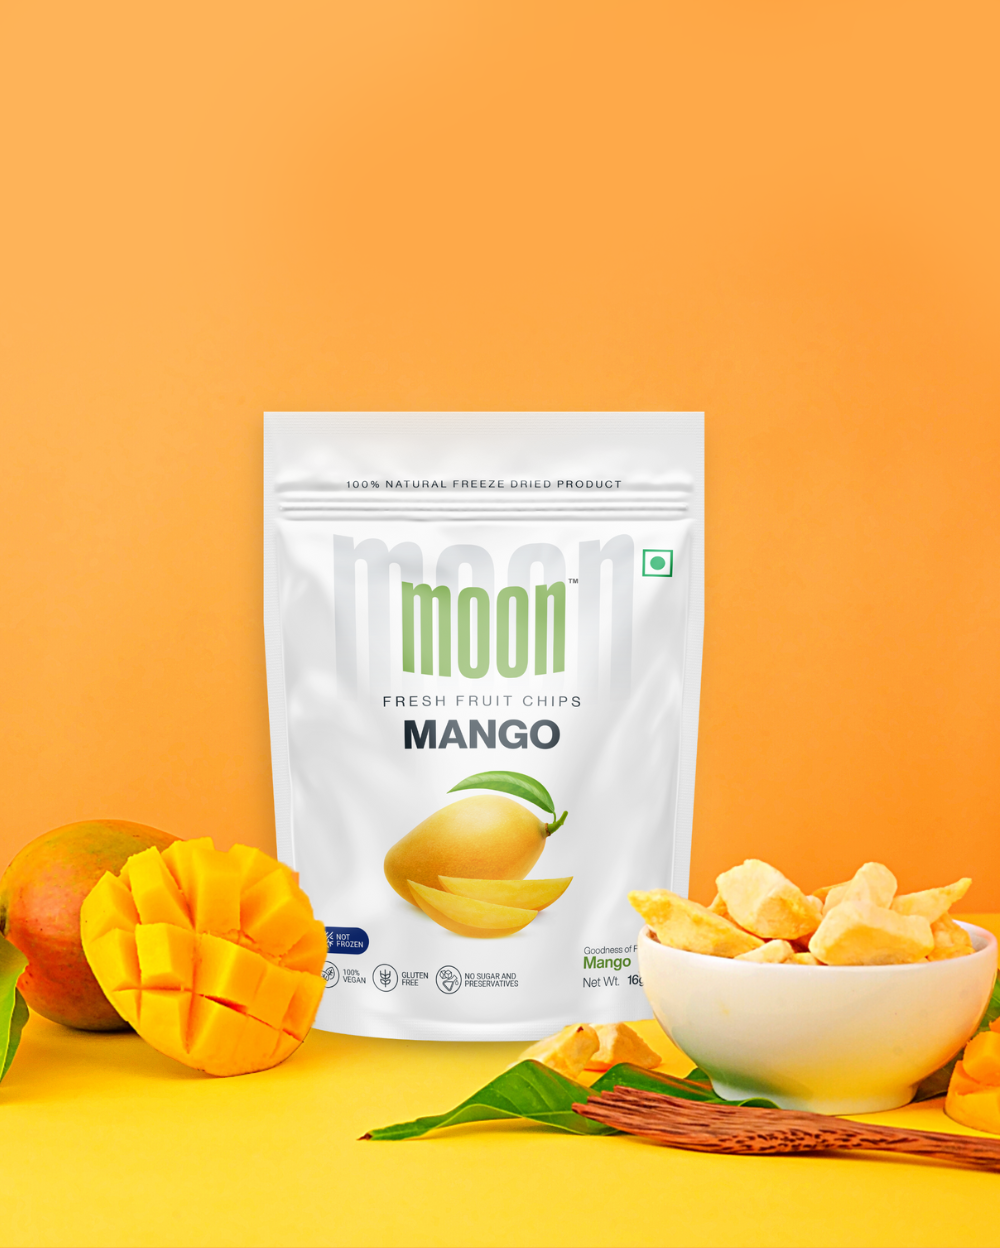 Product description: Moon Freeze Dried Custard Apple Cubes + Mango Cubes with fresh mango and a bowl of chips on an orange background.